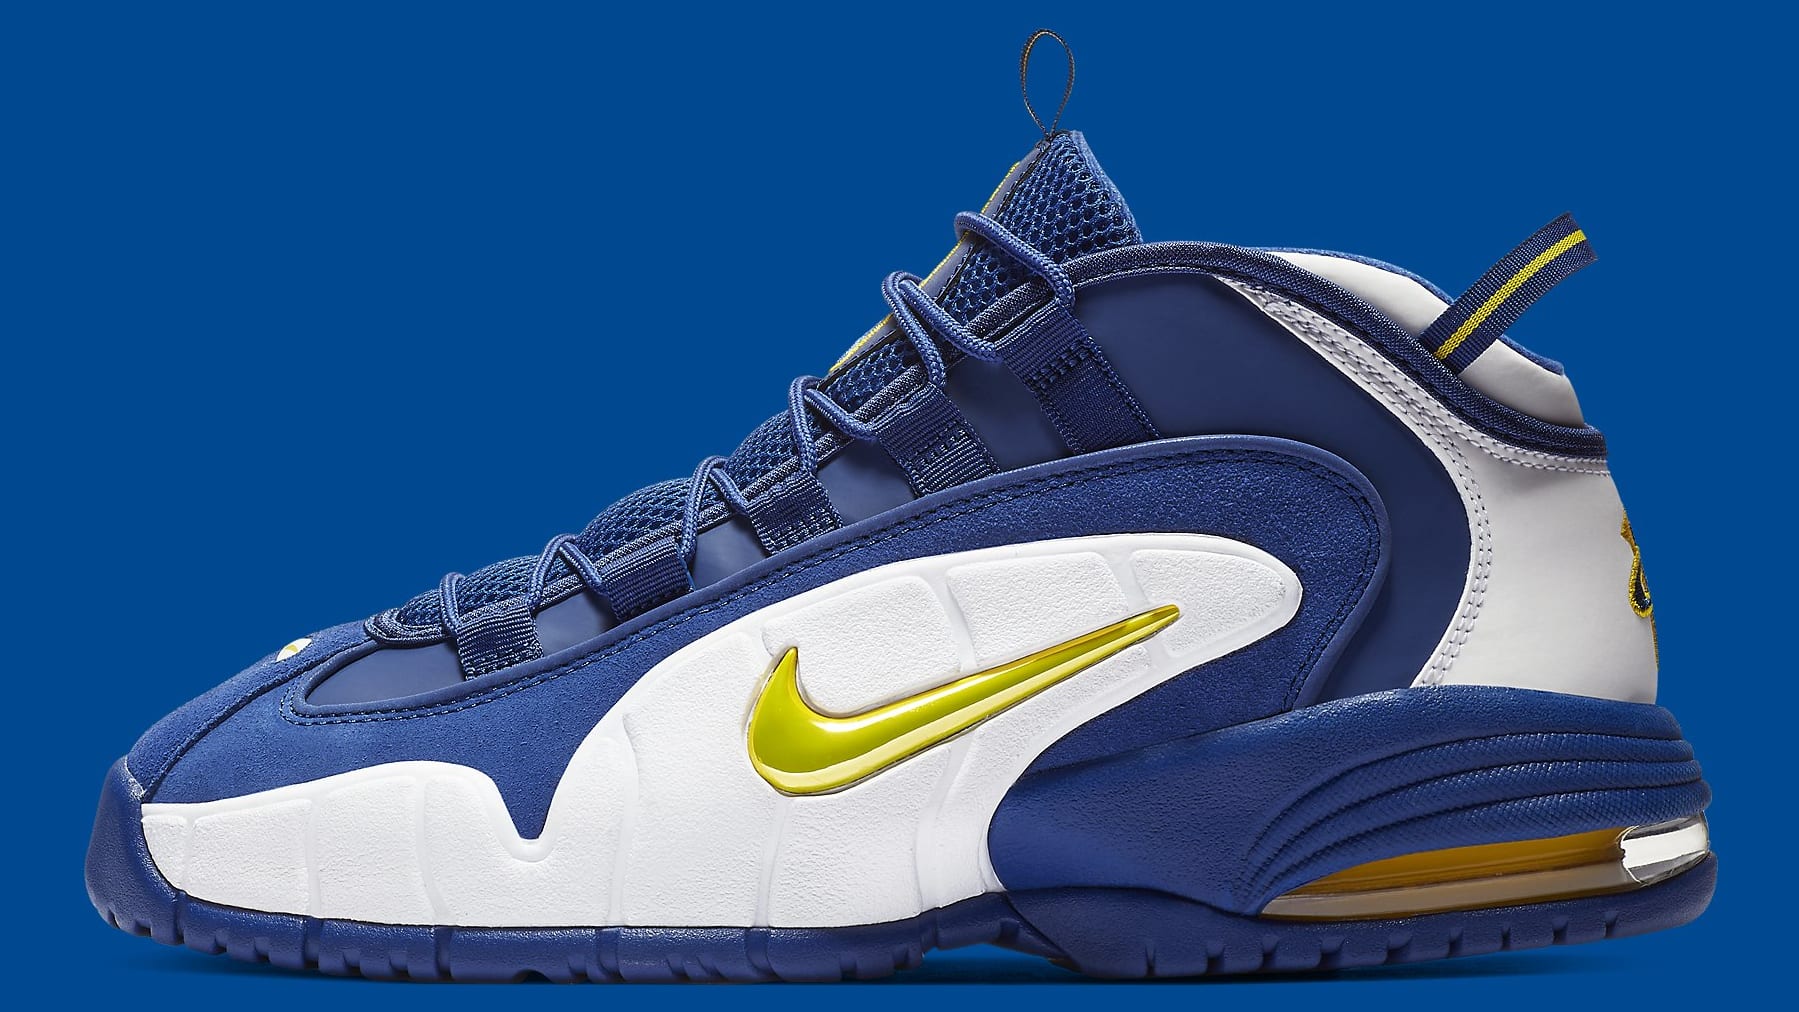 Nike Air Max Penny 1 Warriors Release Date 685153-401 Profile